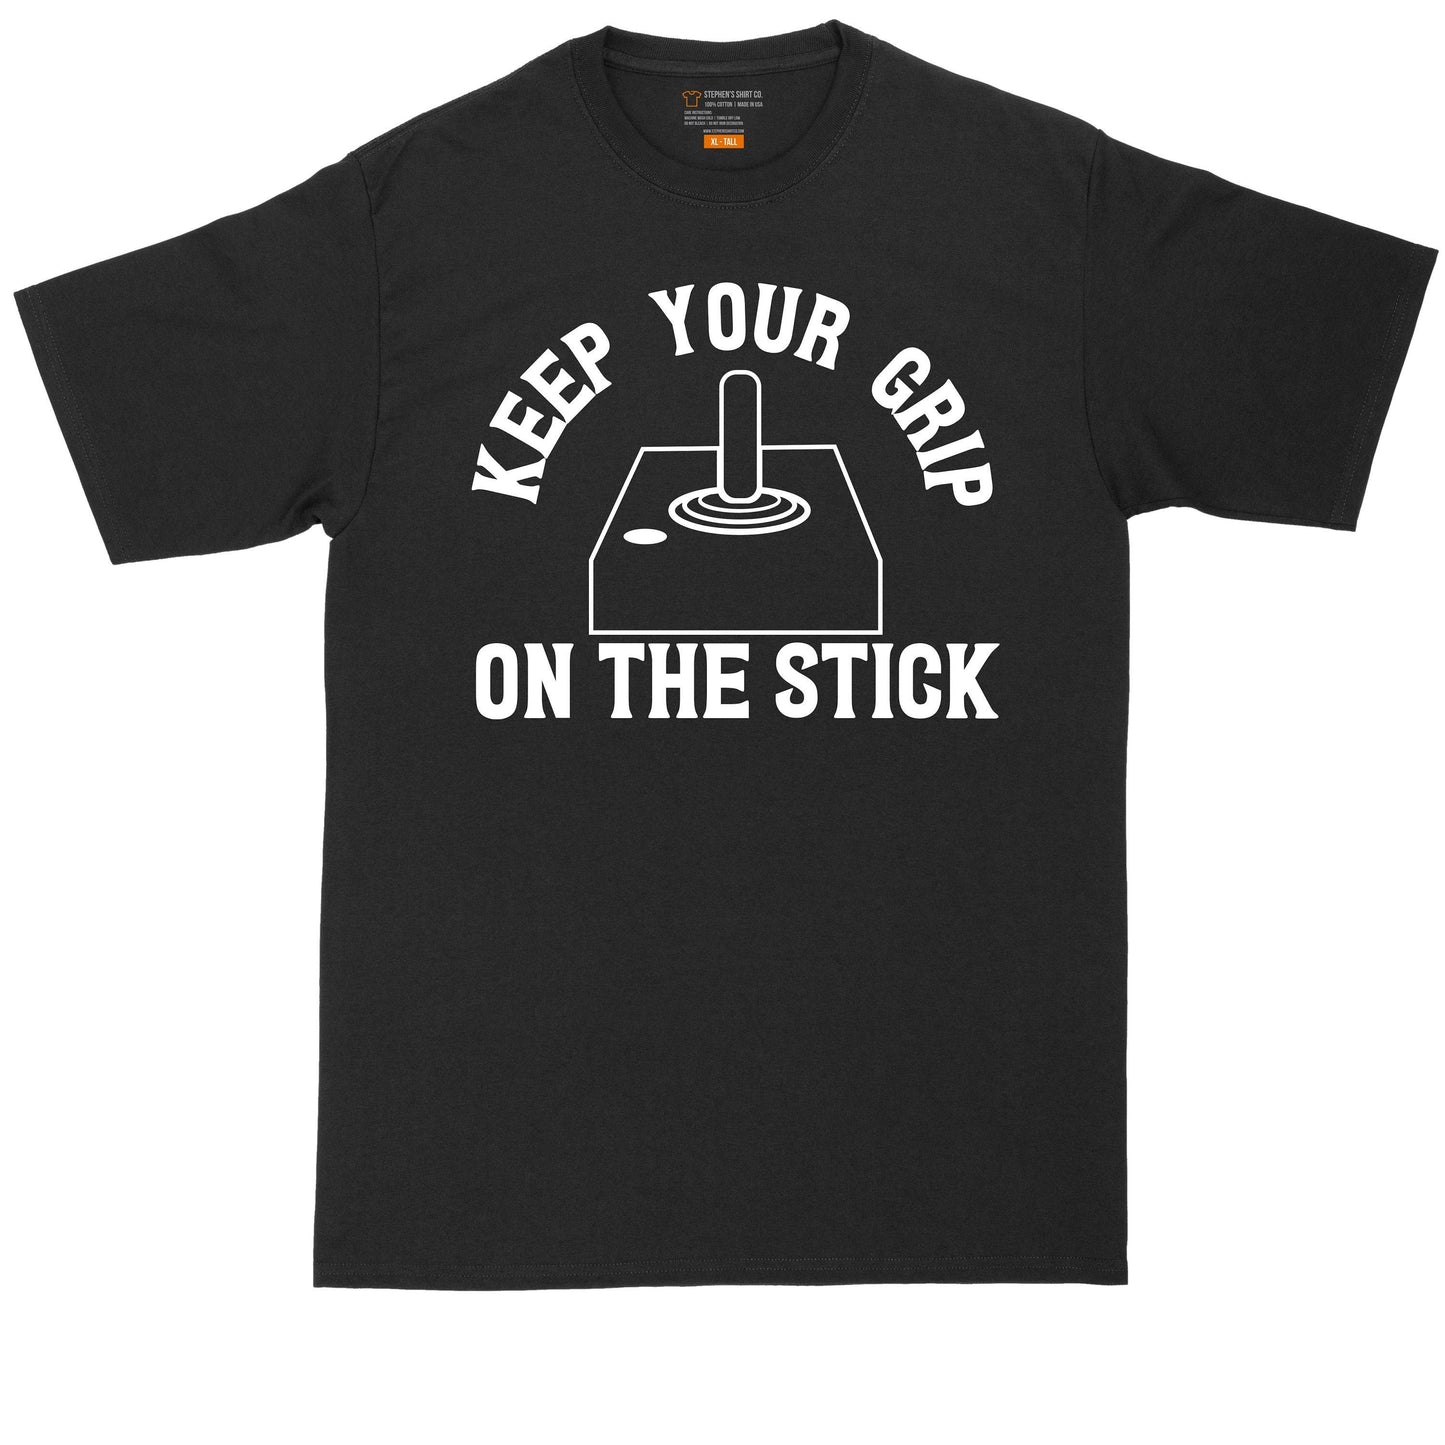 Keep Your Grip on the Stick | Big and Tall Men T Shirt | Funny T-Shirt | Gamer Shirt | Graphic T-Shirt